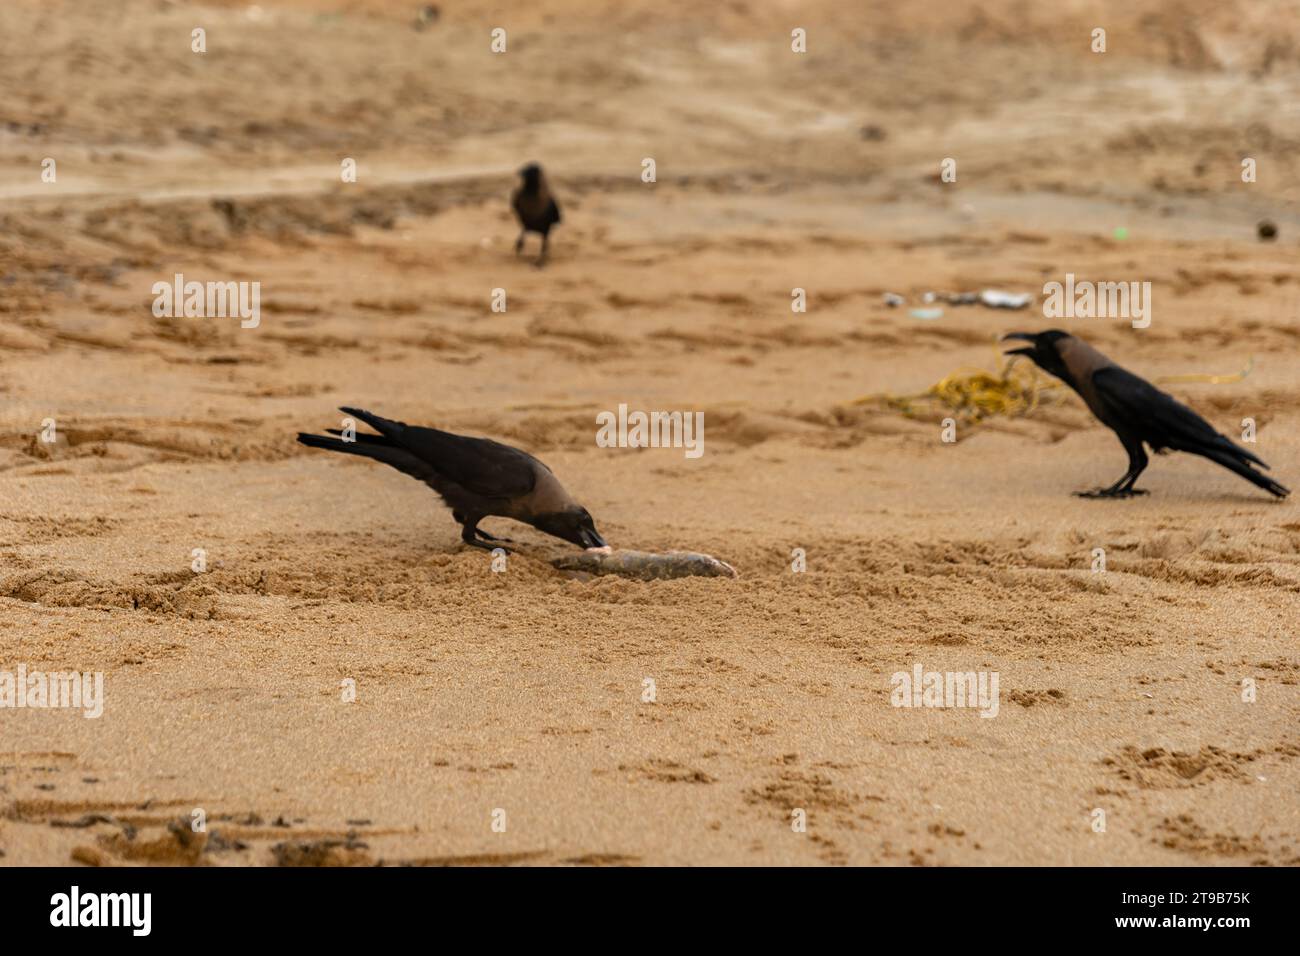 A clever crow savors a fresh seafood meal on a sandy beach Stock Photo